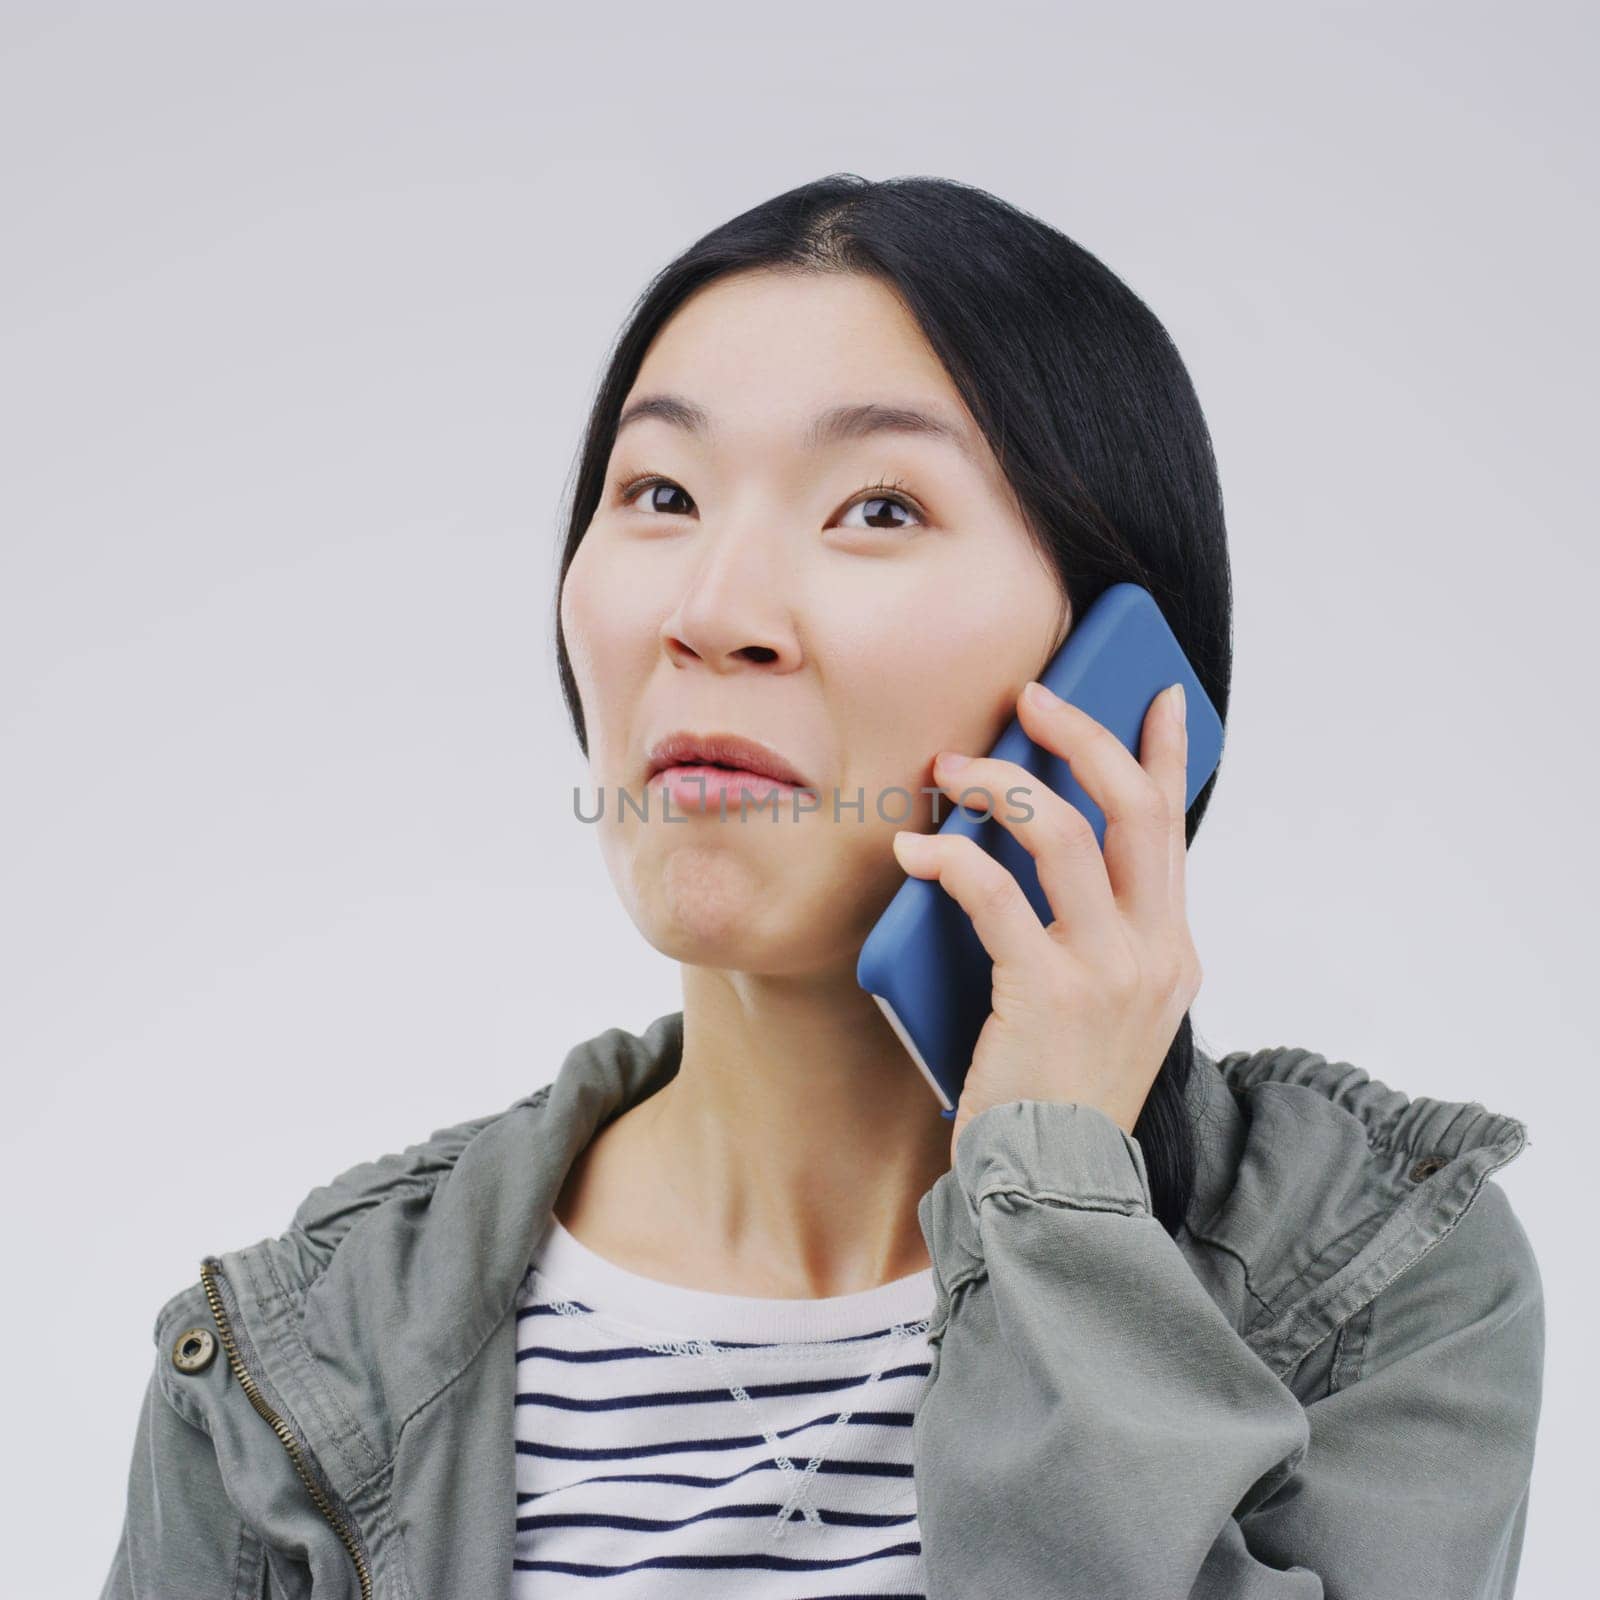 Gossip, phone call and Asian woman talking in studio isolated on a white background. Listening, cellphone and female person speaking, discussion or communication for conversation, news or online chat by YuriArcurs